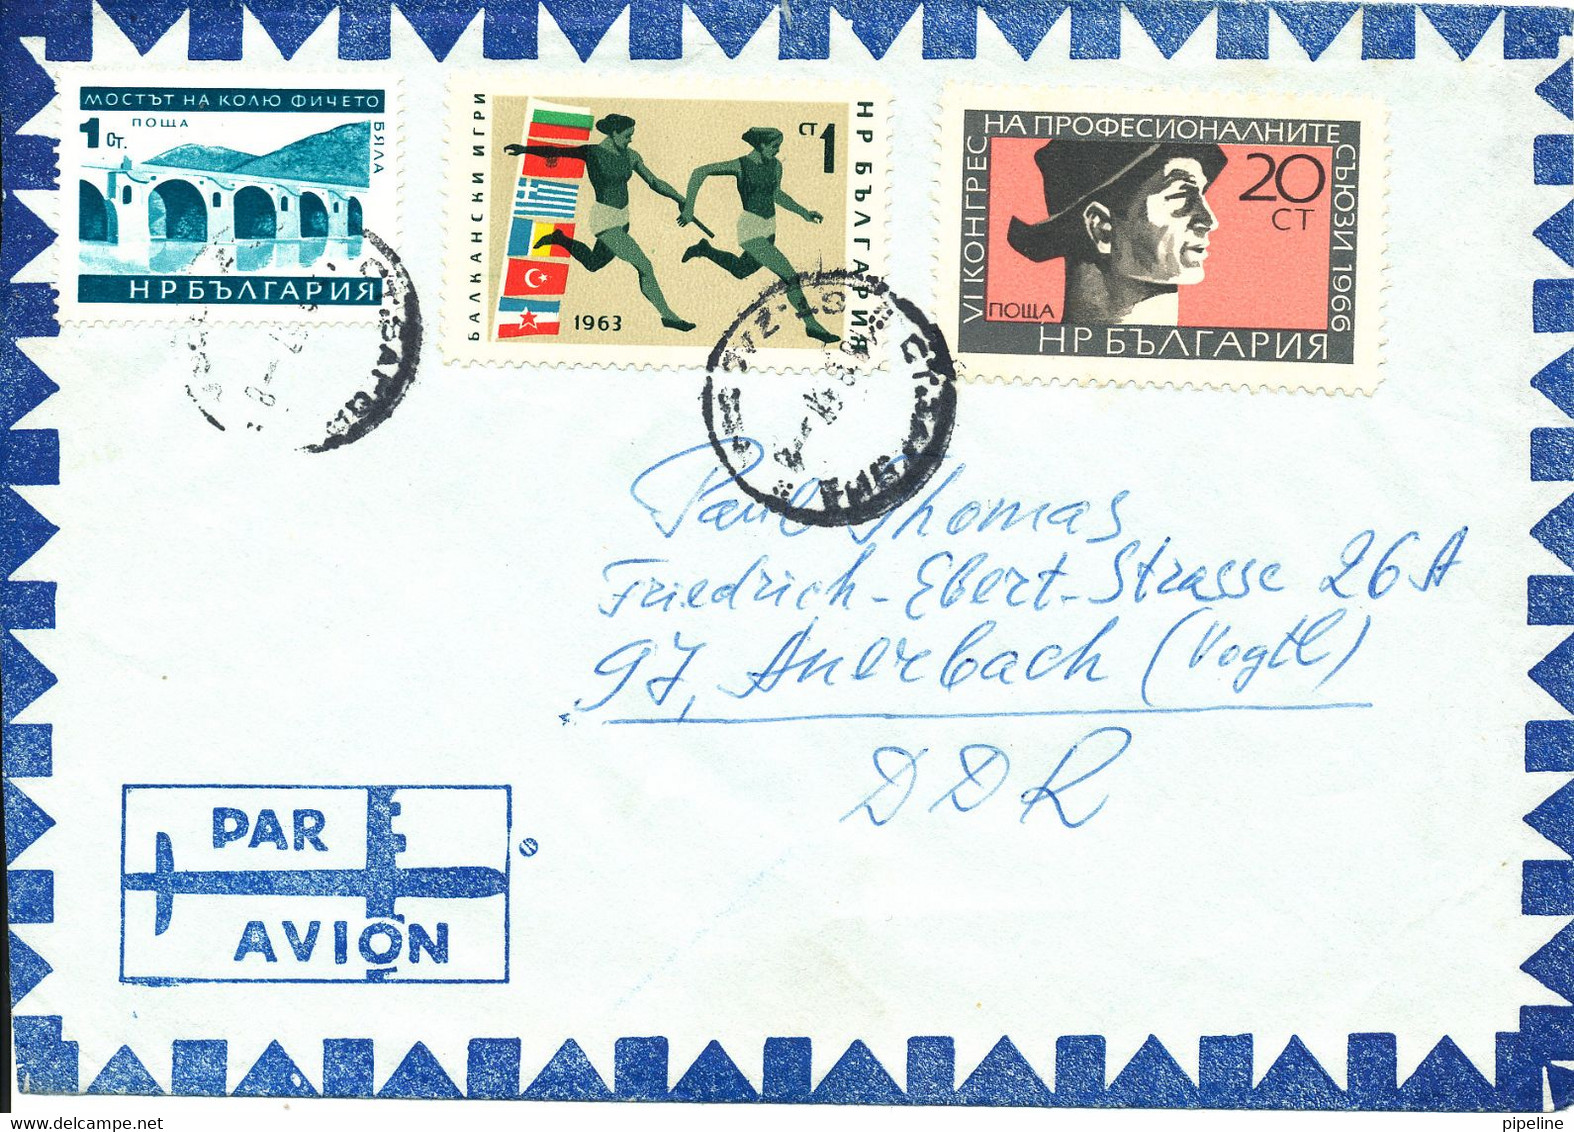 Bulgaria Air Cover Sent To Germany DDR 18-8-1967 Topic Stamps - Poste Aérienne